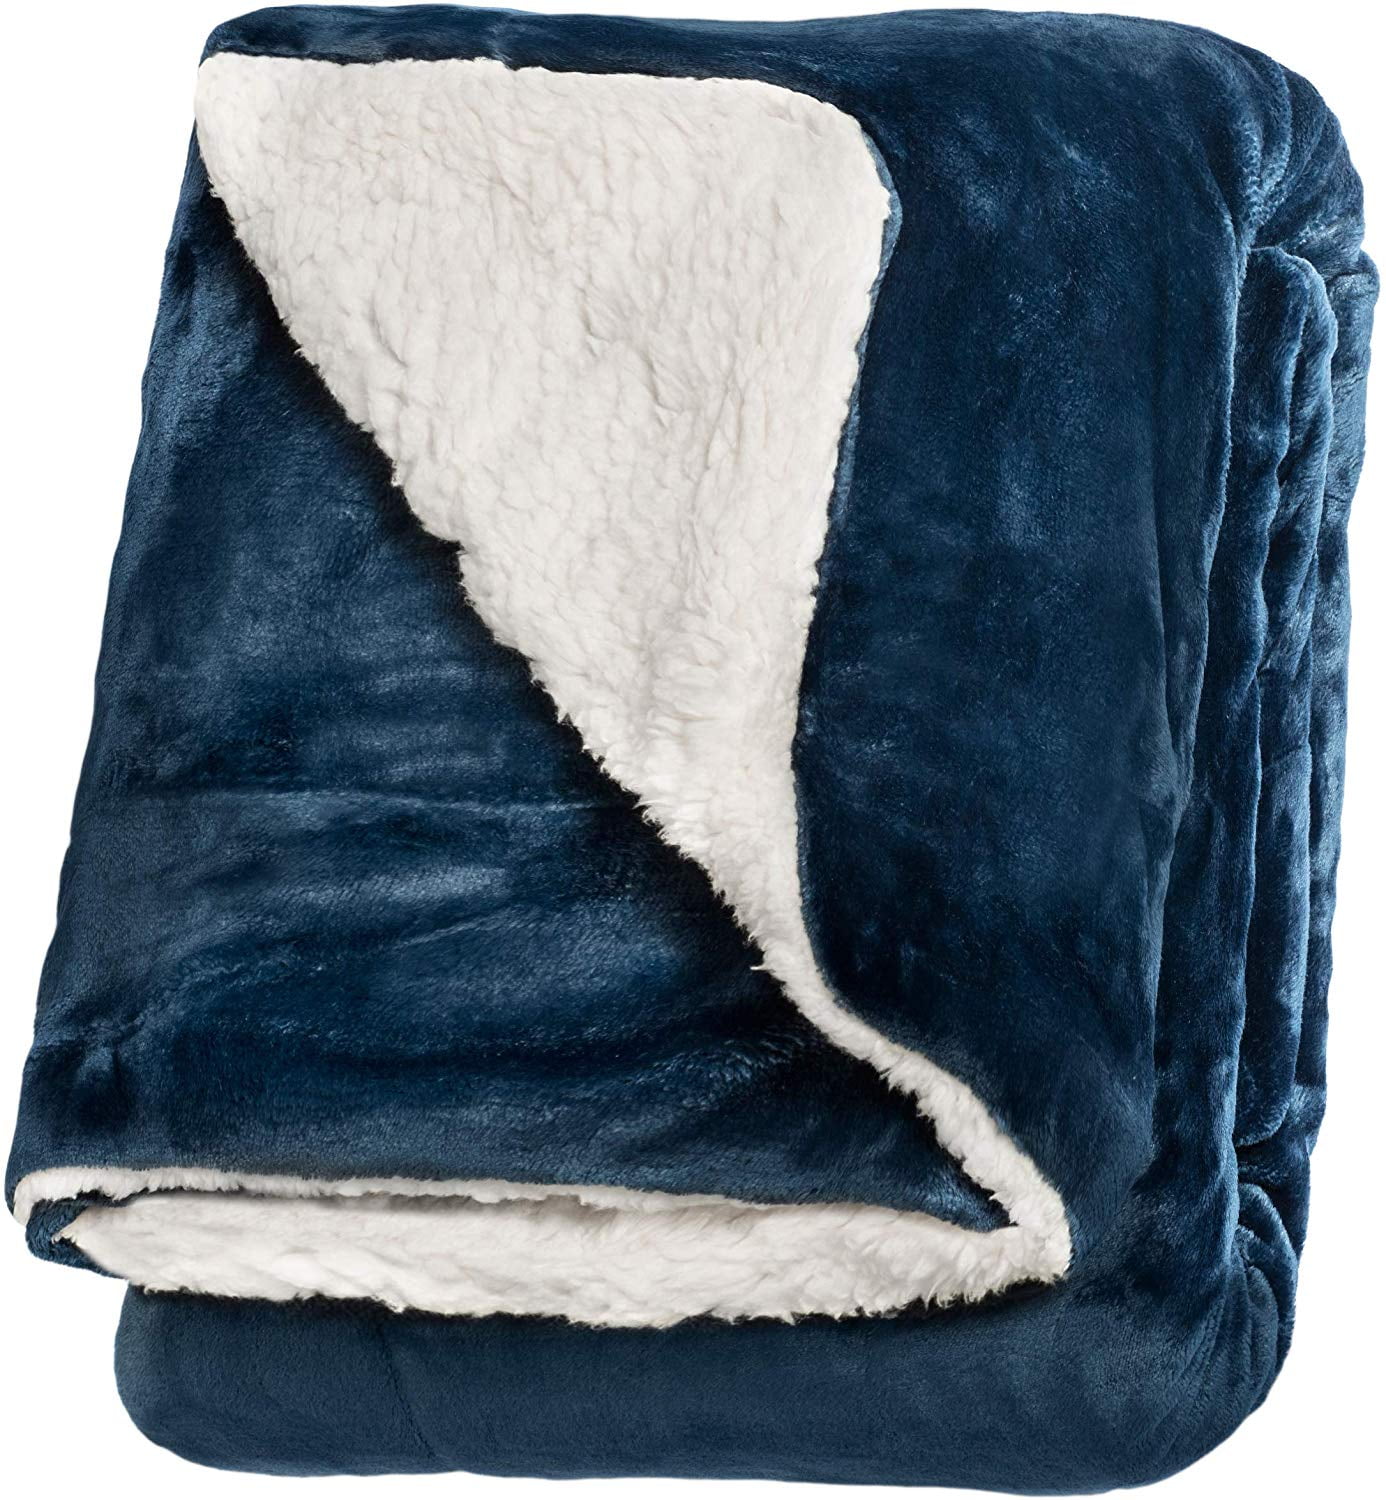 Life Comfort Microfiber Plush Polyester 60”x70” Large All Season Blanket for Bed or Couch Ultimate Sherpa Throw Blue 1152843